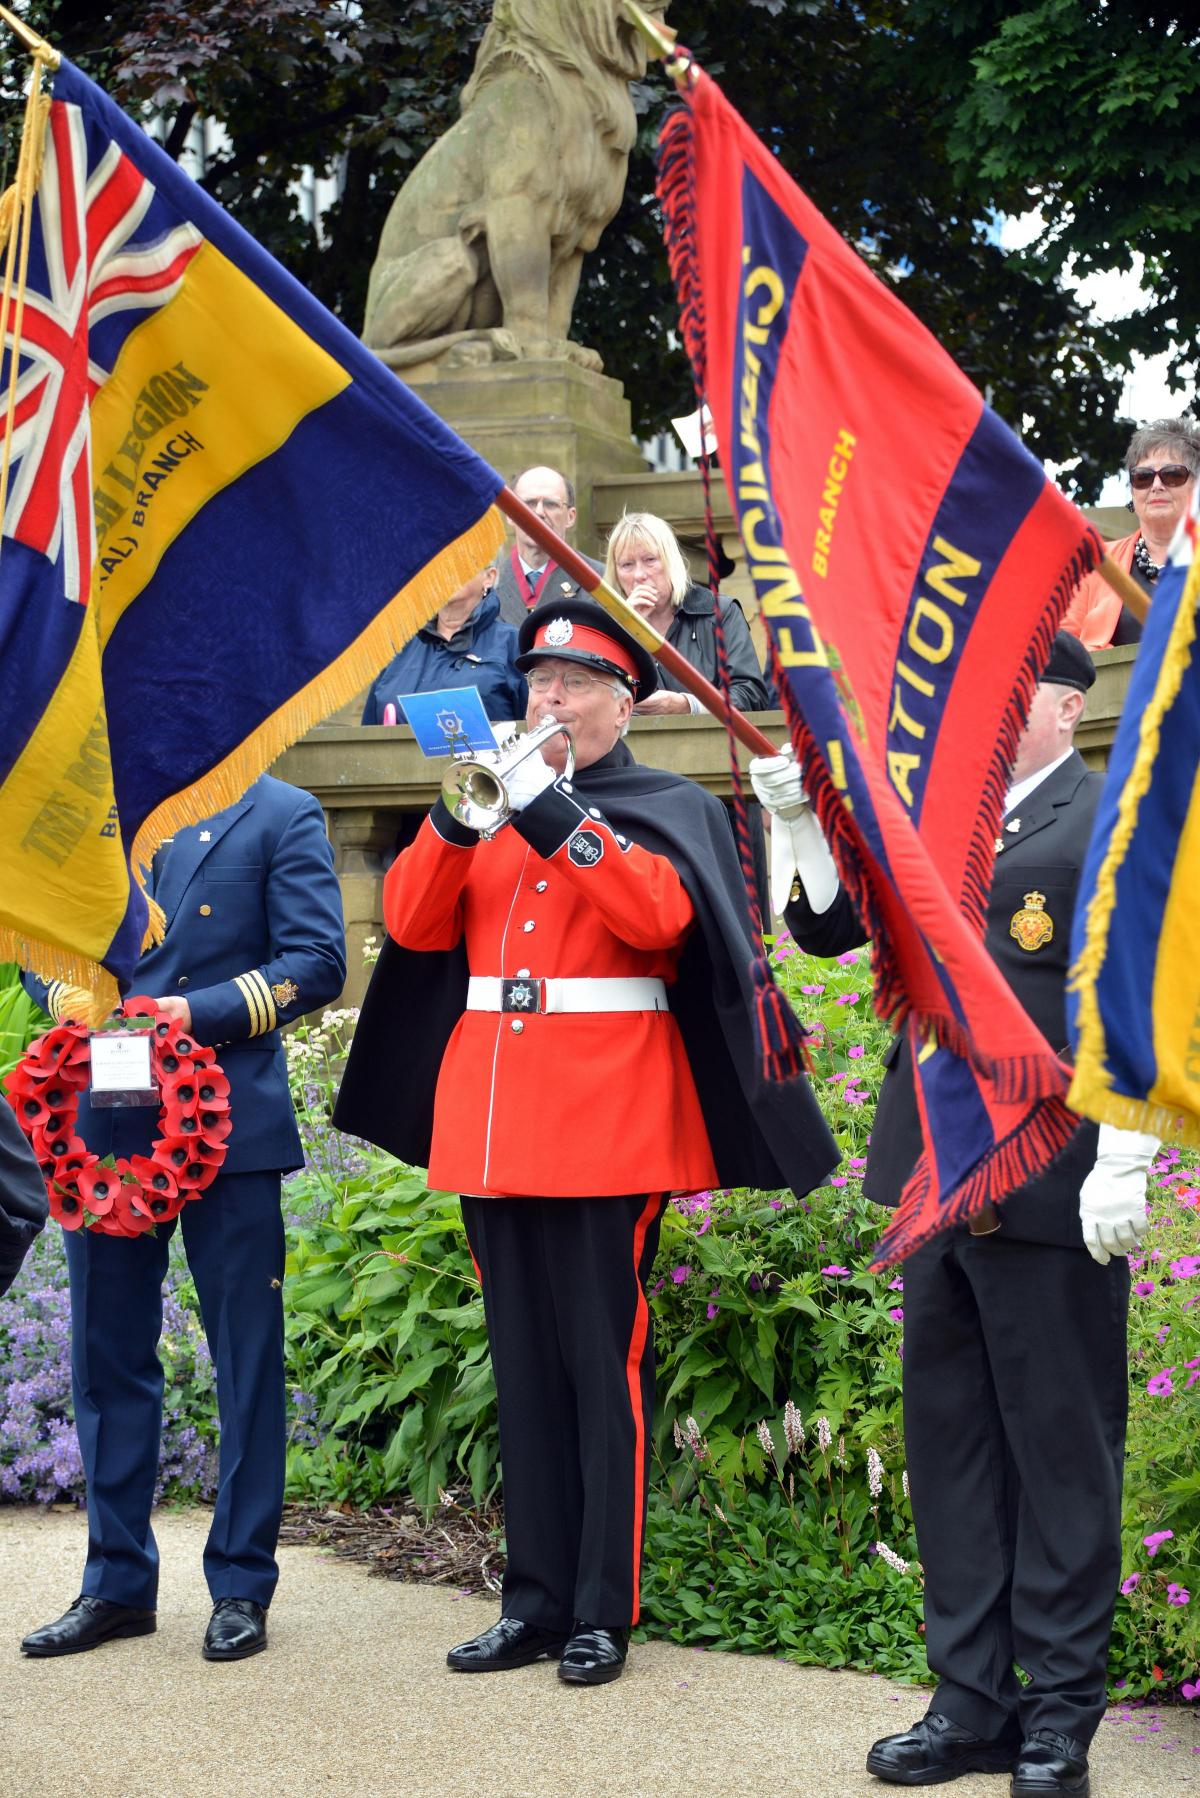 Services to mark the centenary of the Battle of the Somme